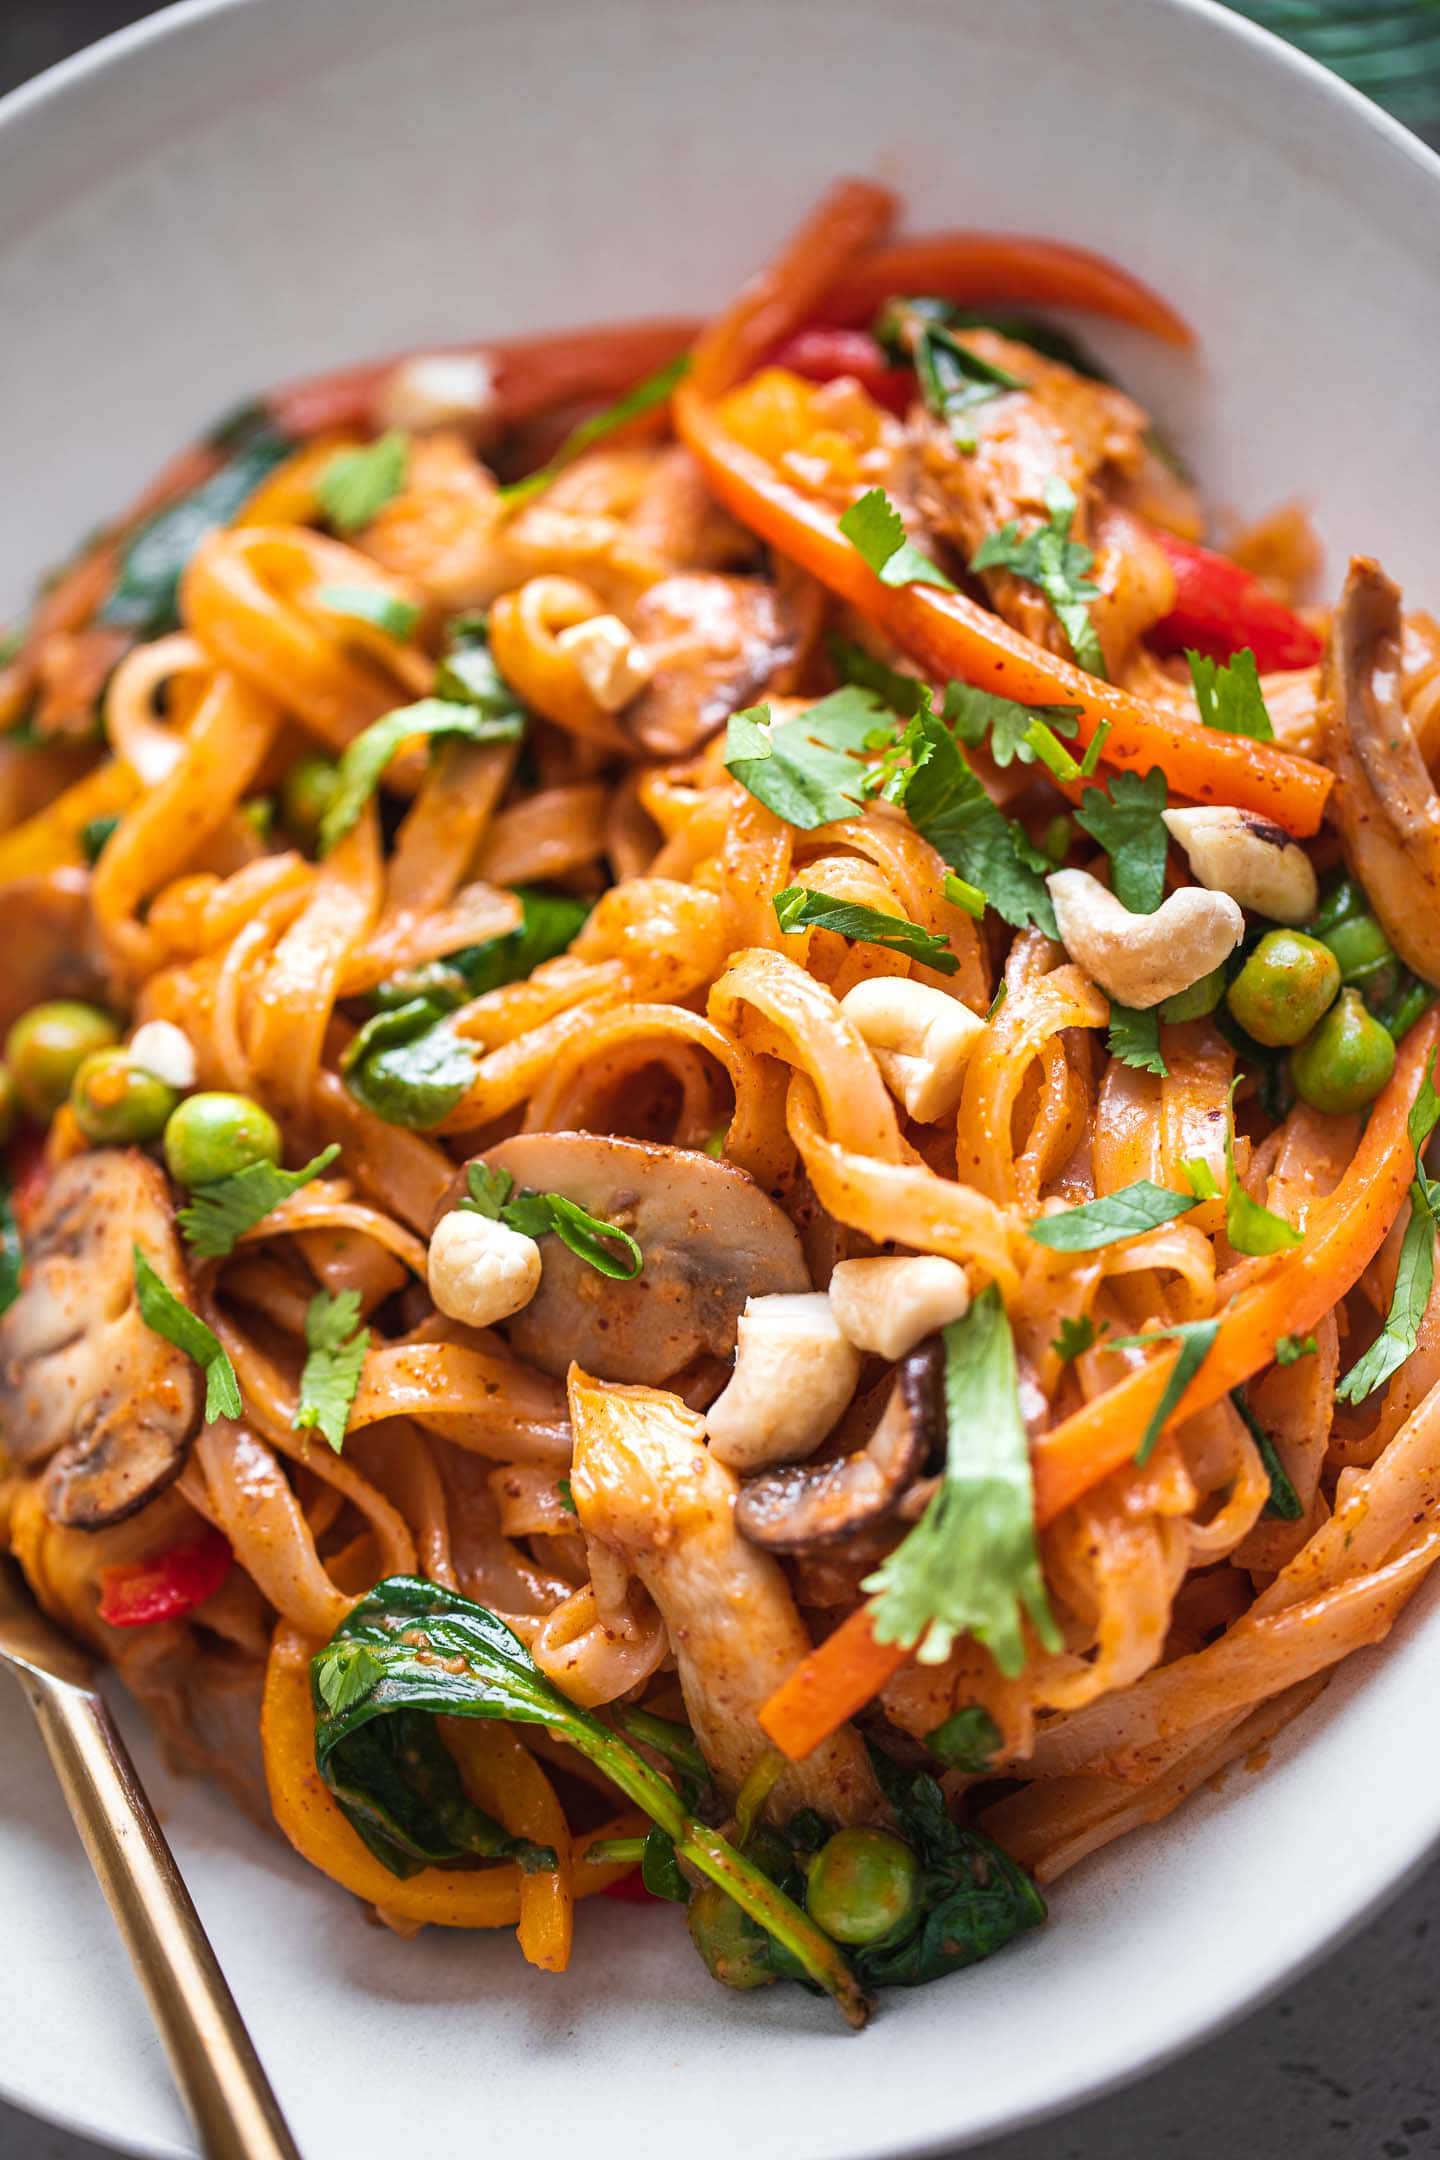 Closeup of stir-fried noodles with vegetables and coconut sauce